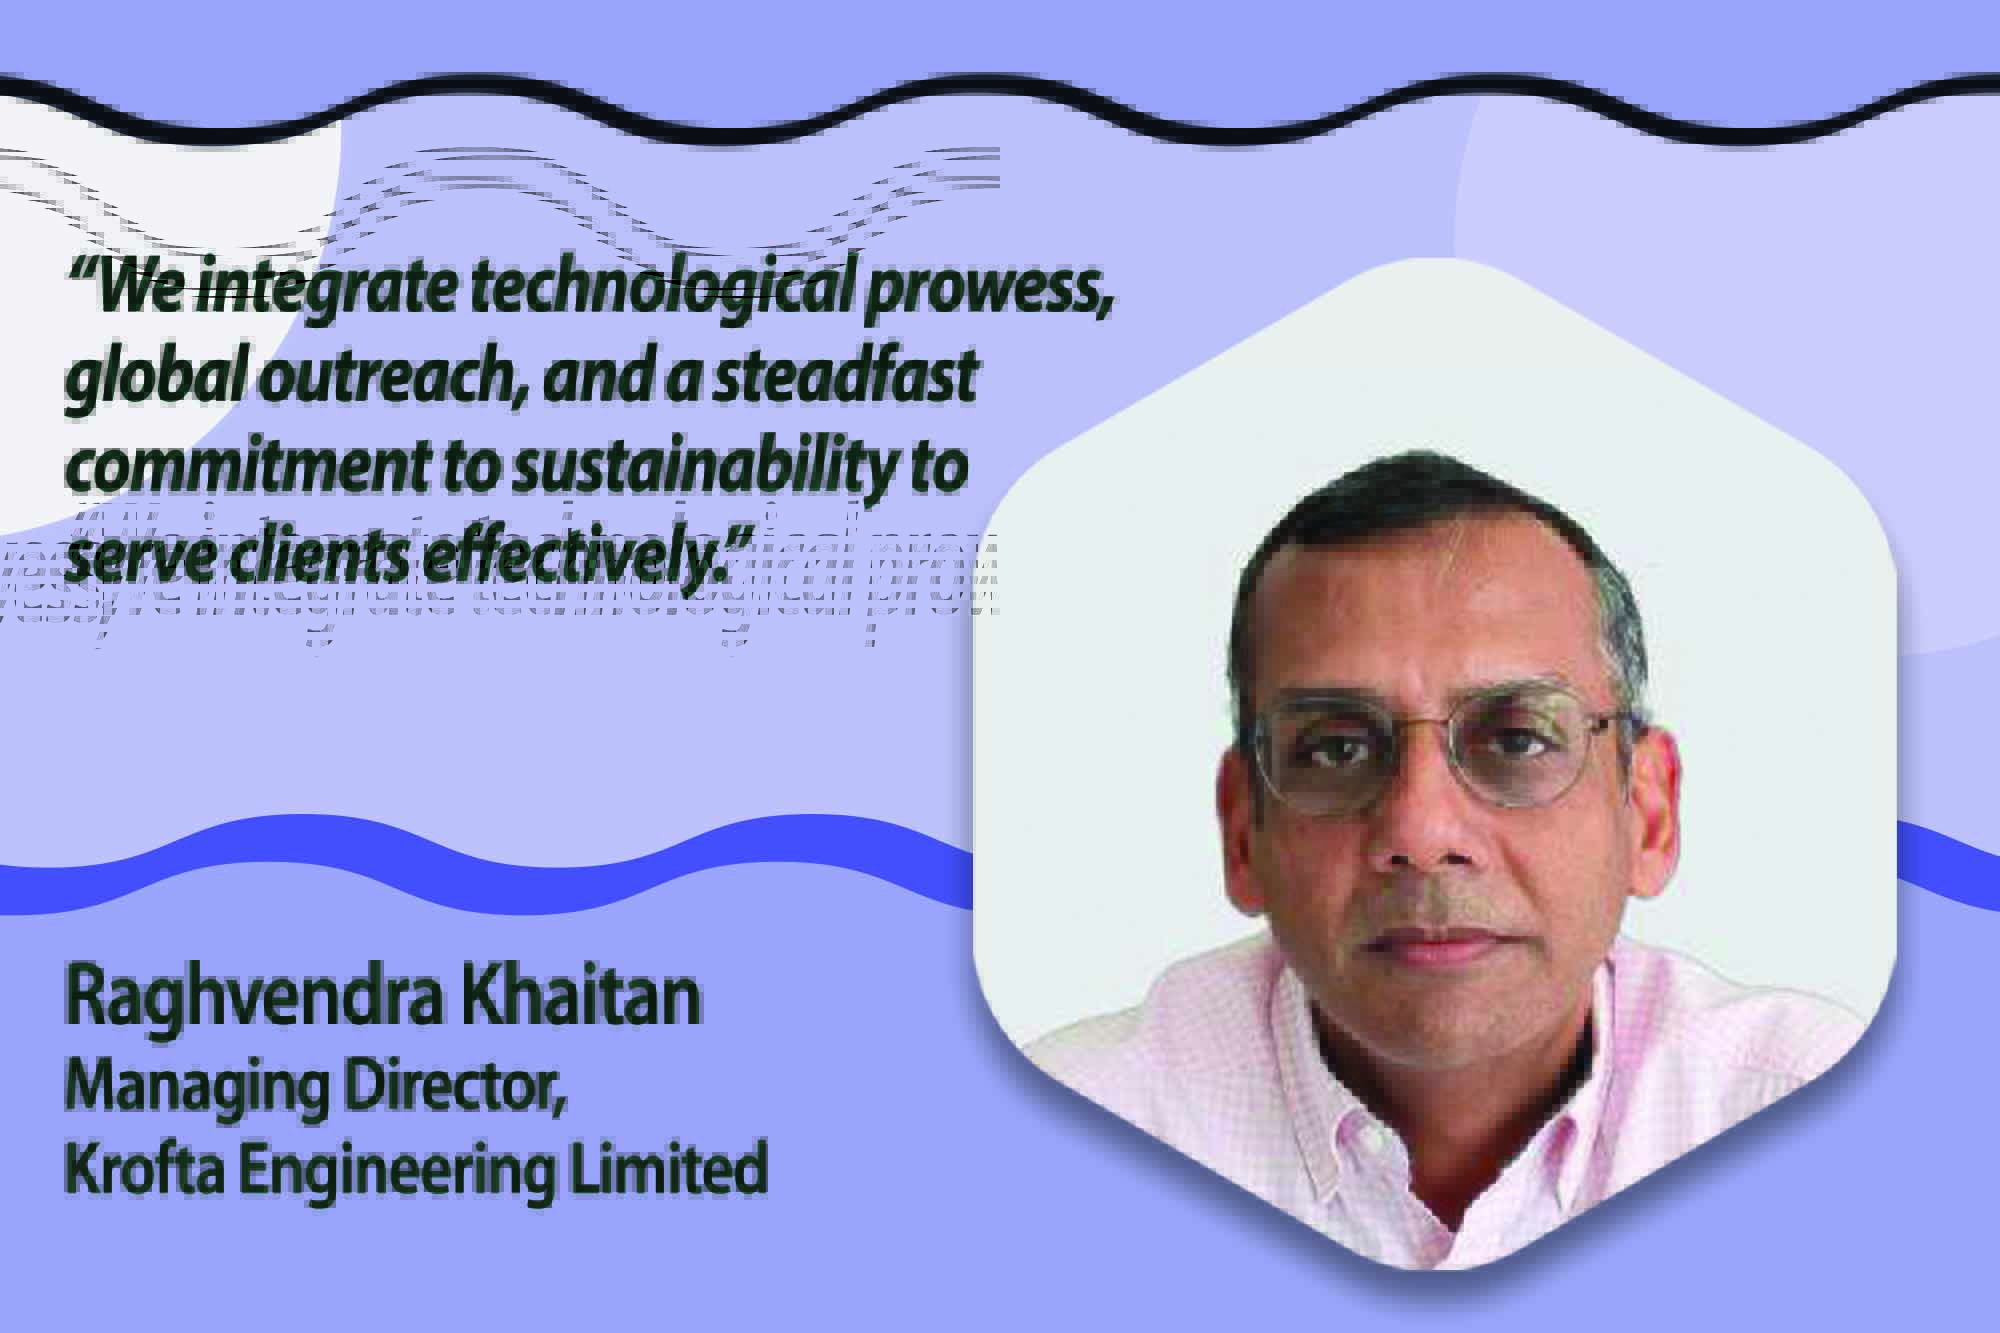 Krofta Engineering emerges as a trailblazer in the water treatment industry, offering diverse, innovative, affordable solutions. With a steadfast commitment to excellence and cost-effectiveness, Krofta Engineering redefines the water treatment landscape, providing clients with cutting-edge technologies tailored to their needs.